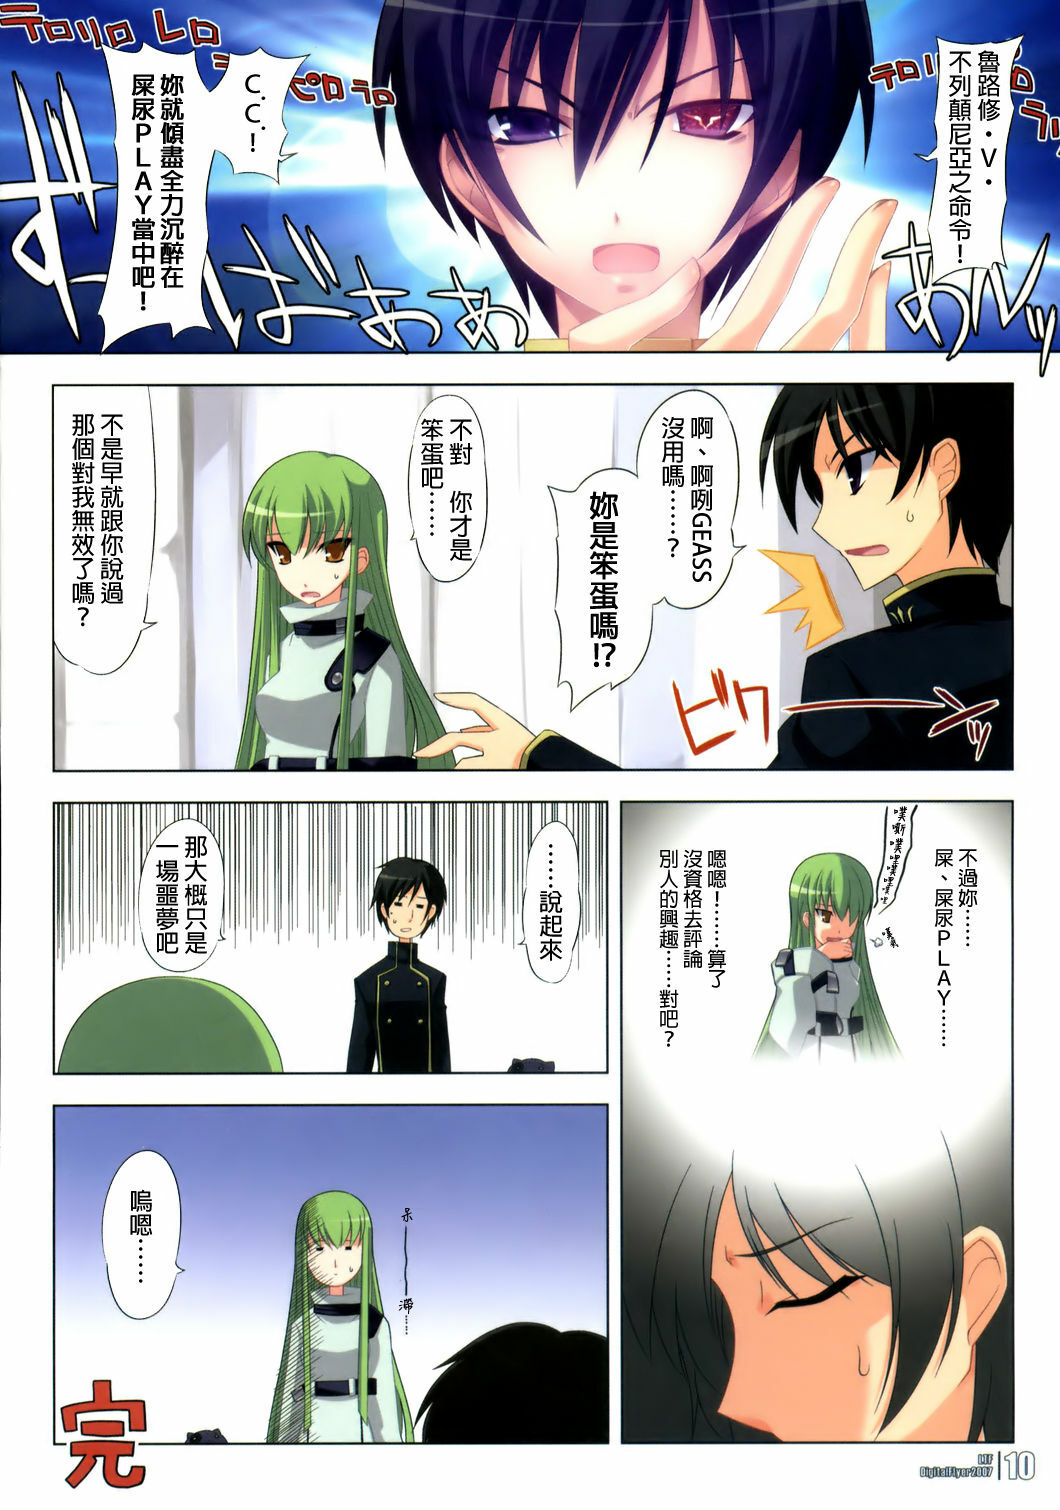 (SC34) [Digital Flyer (Oota Yuuichi)] LTF (Lelouch The Fullpower) (Code Geass: Lelouch of the Rebellion) [Chinese] [final個人漢化] page 10 full